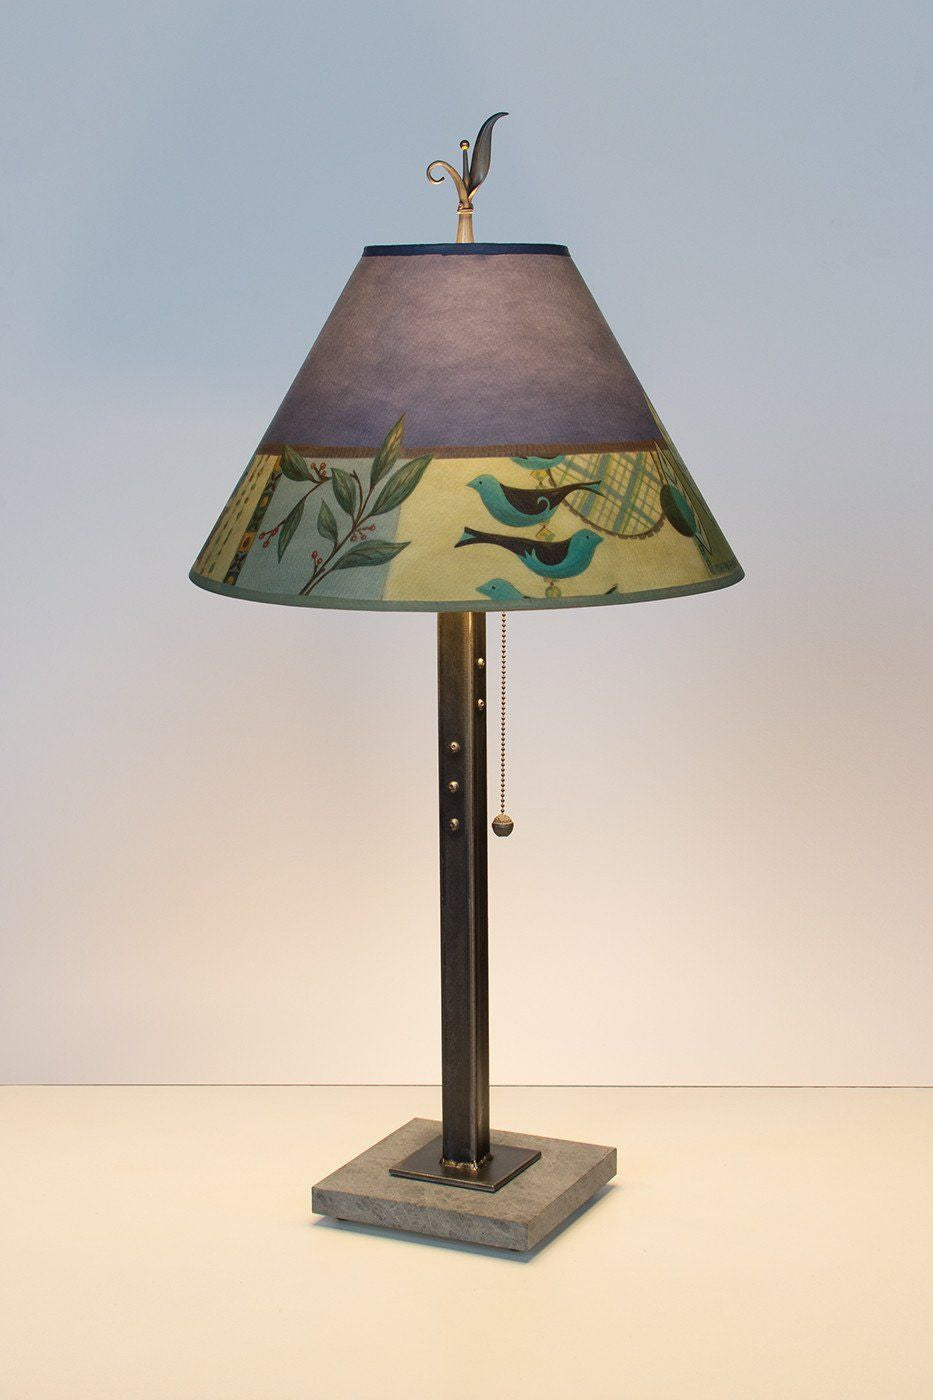 Steel Table Lamp on Marble with Medium Conical Shade in New Capri Periwinkle - Lit